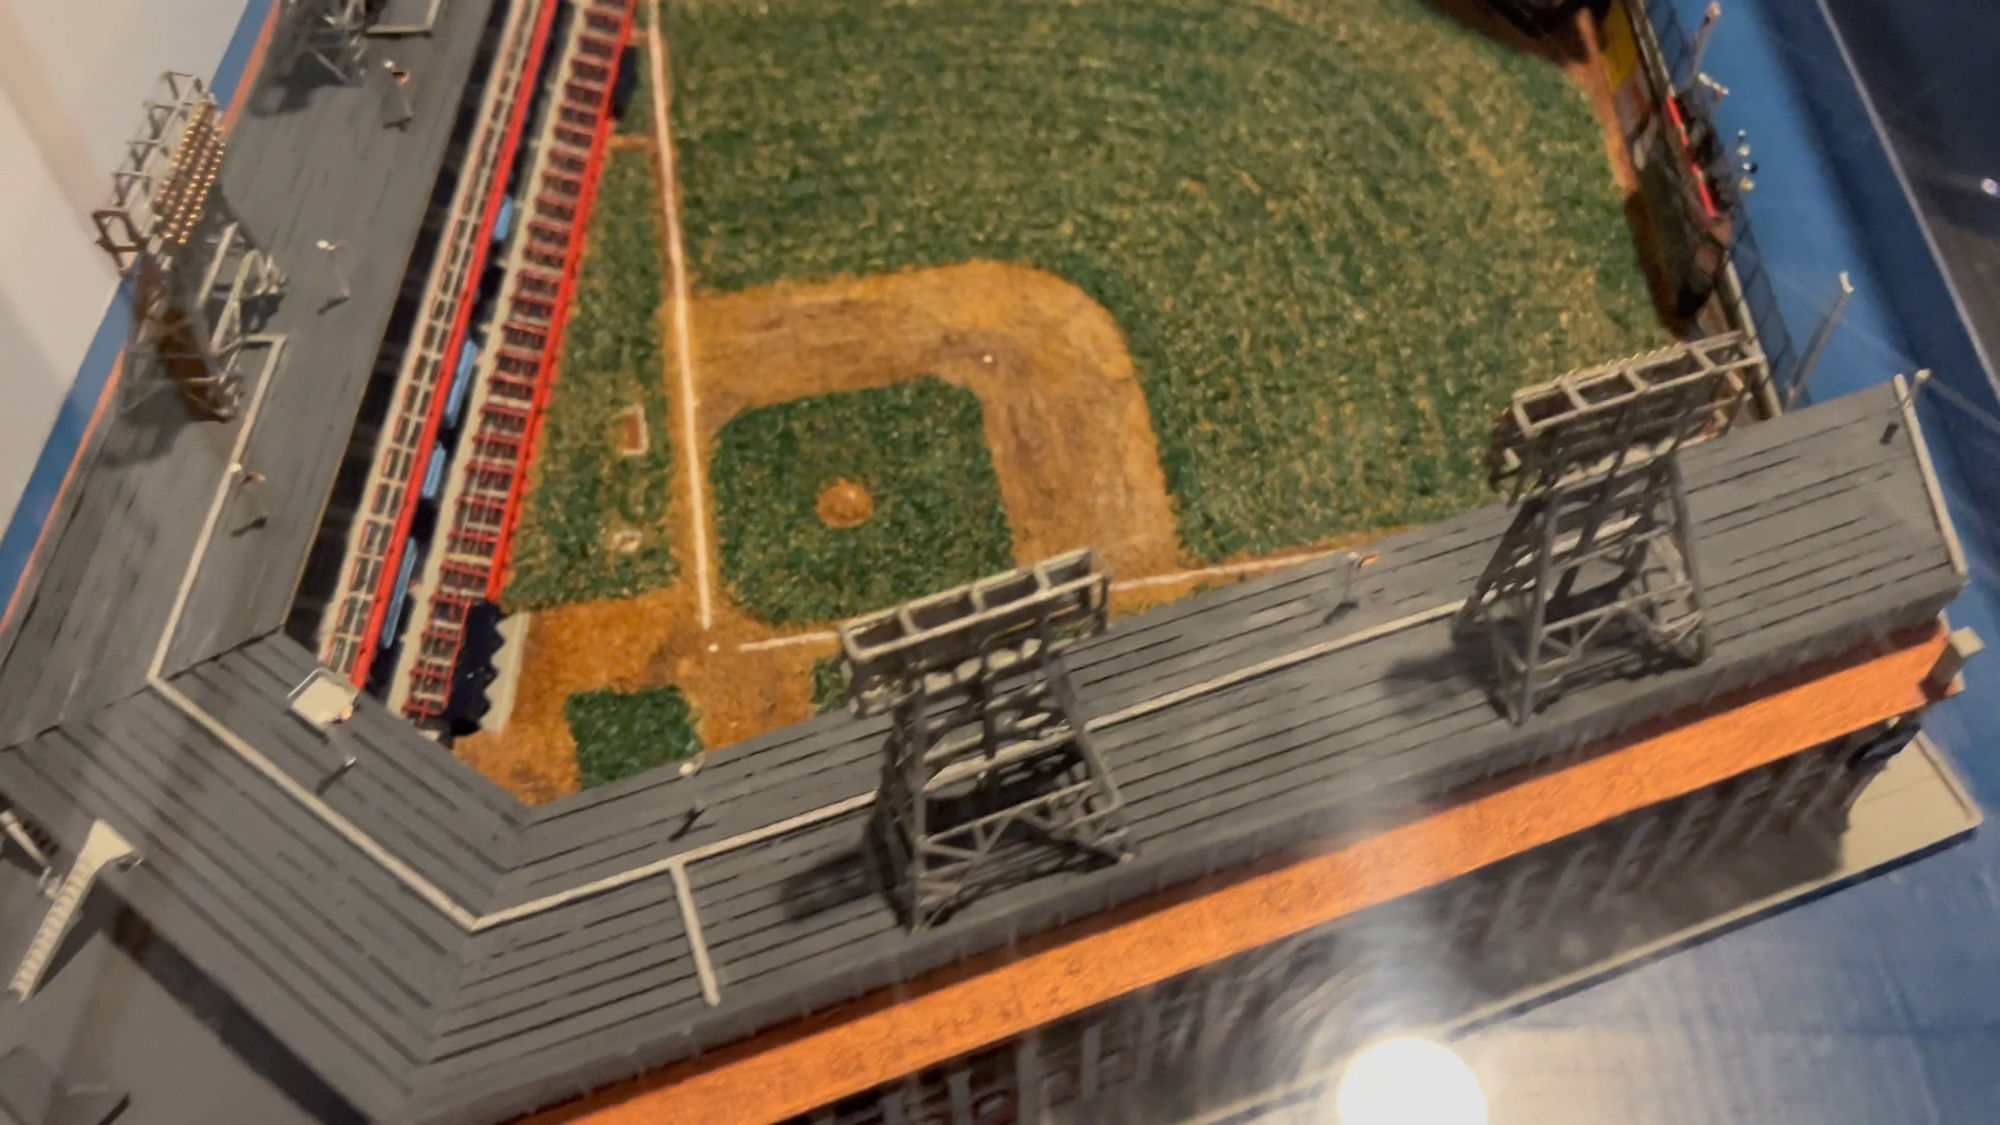 Ebbets Field Architectural Model